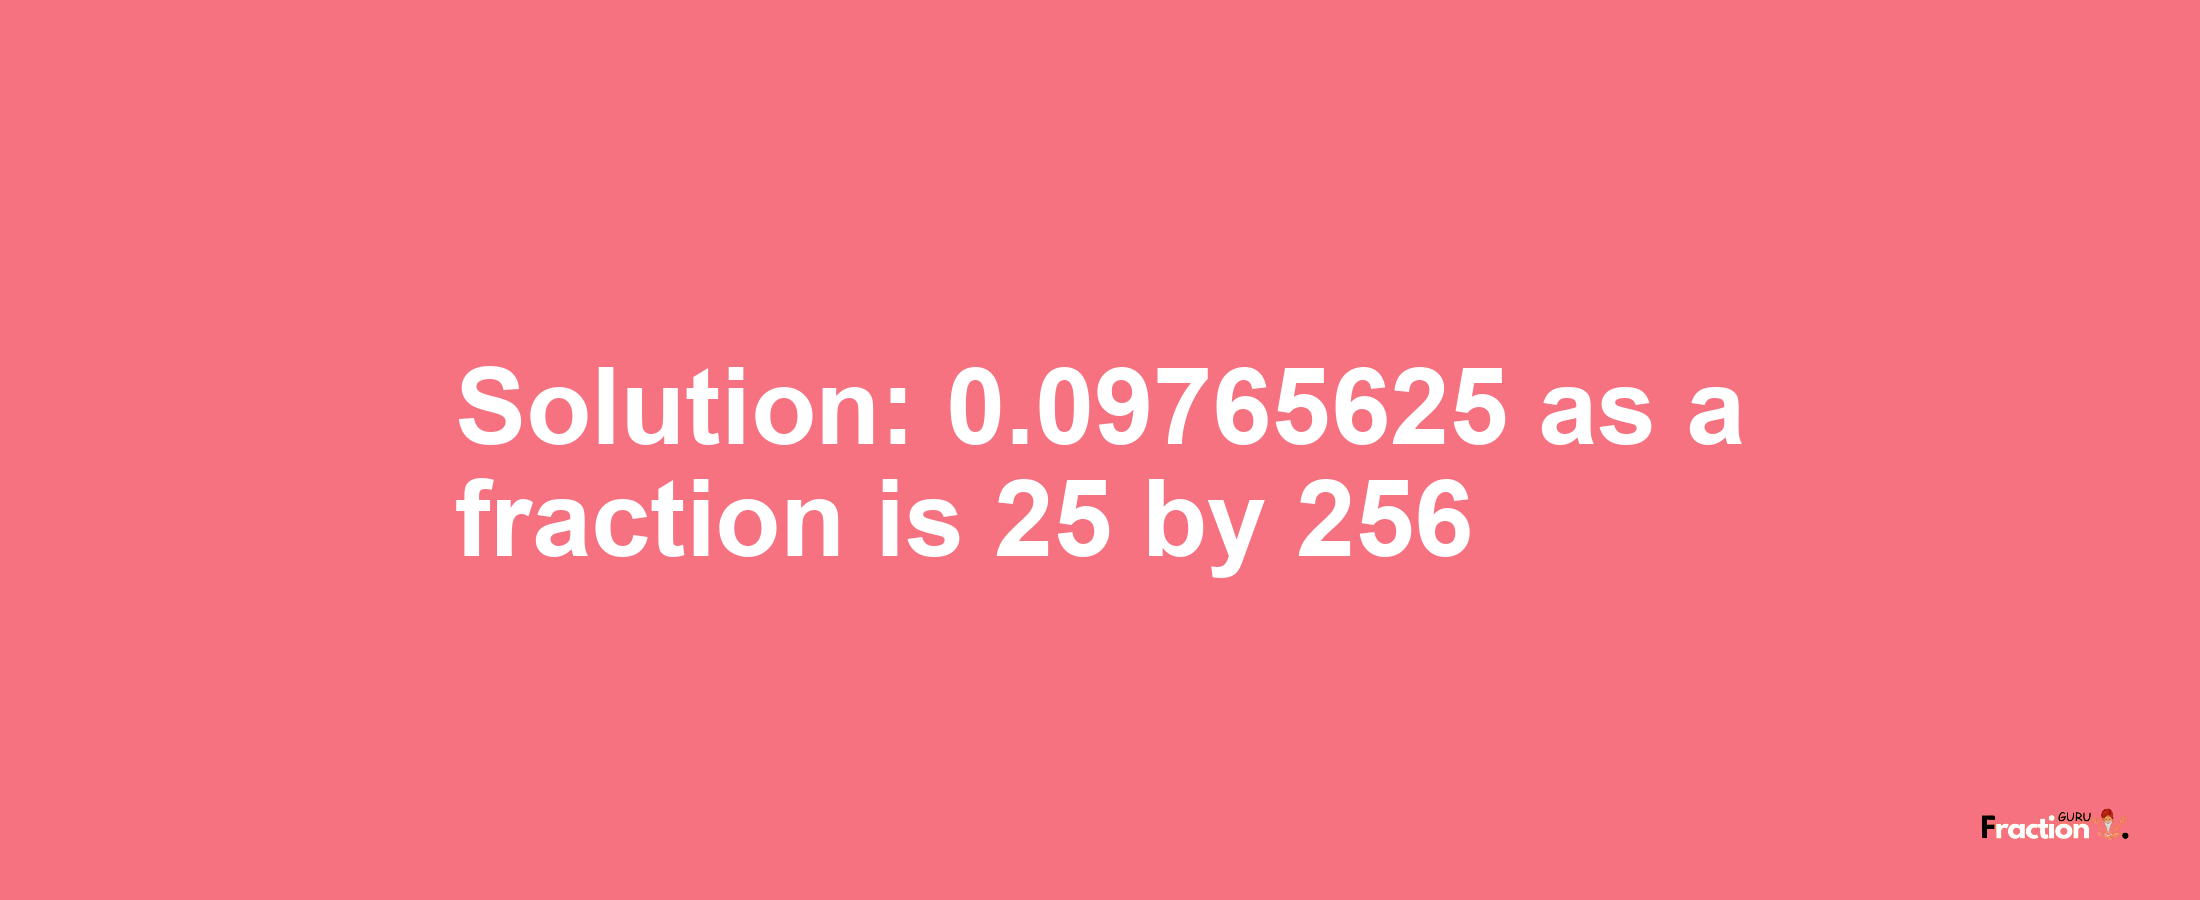 Solution:0.09765625 as a fraction is 25/256